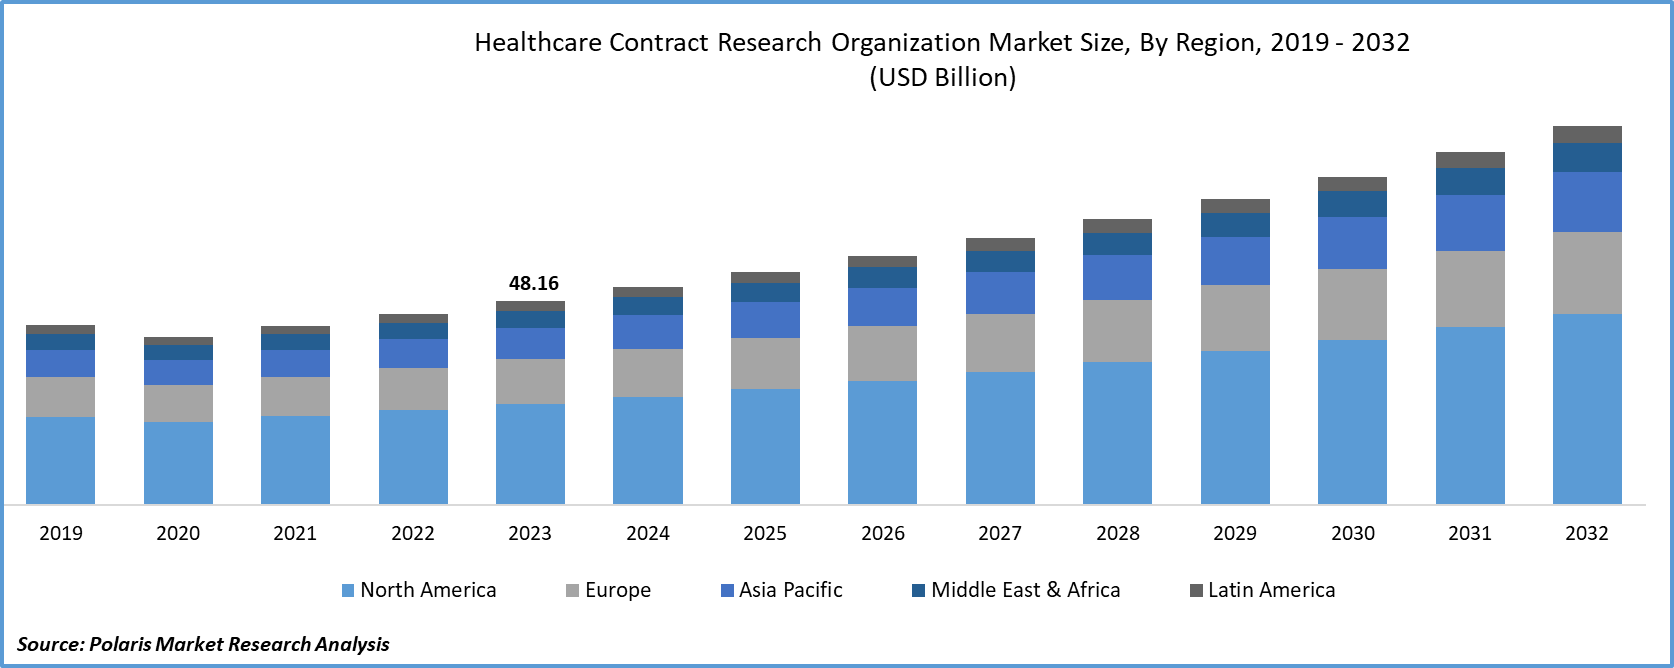 Healthcare Contract Research Organization Market Size